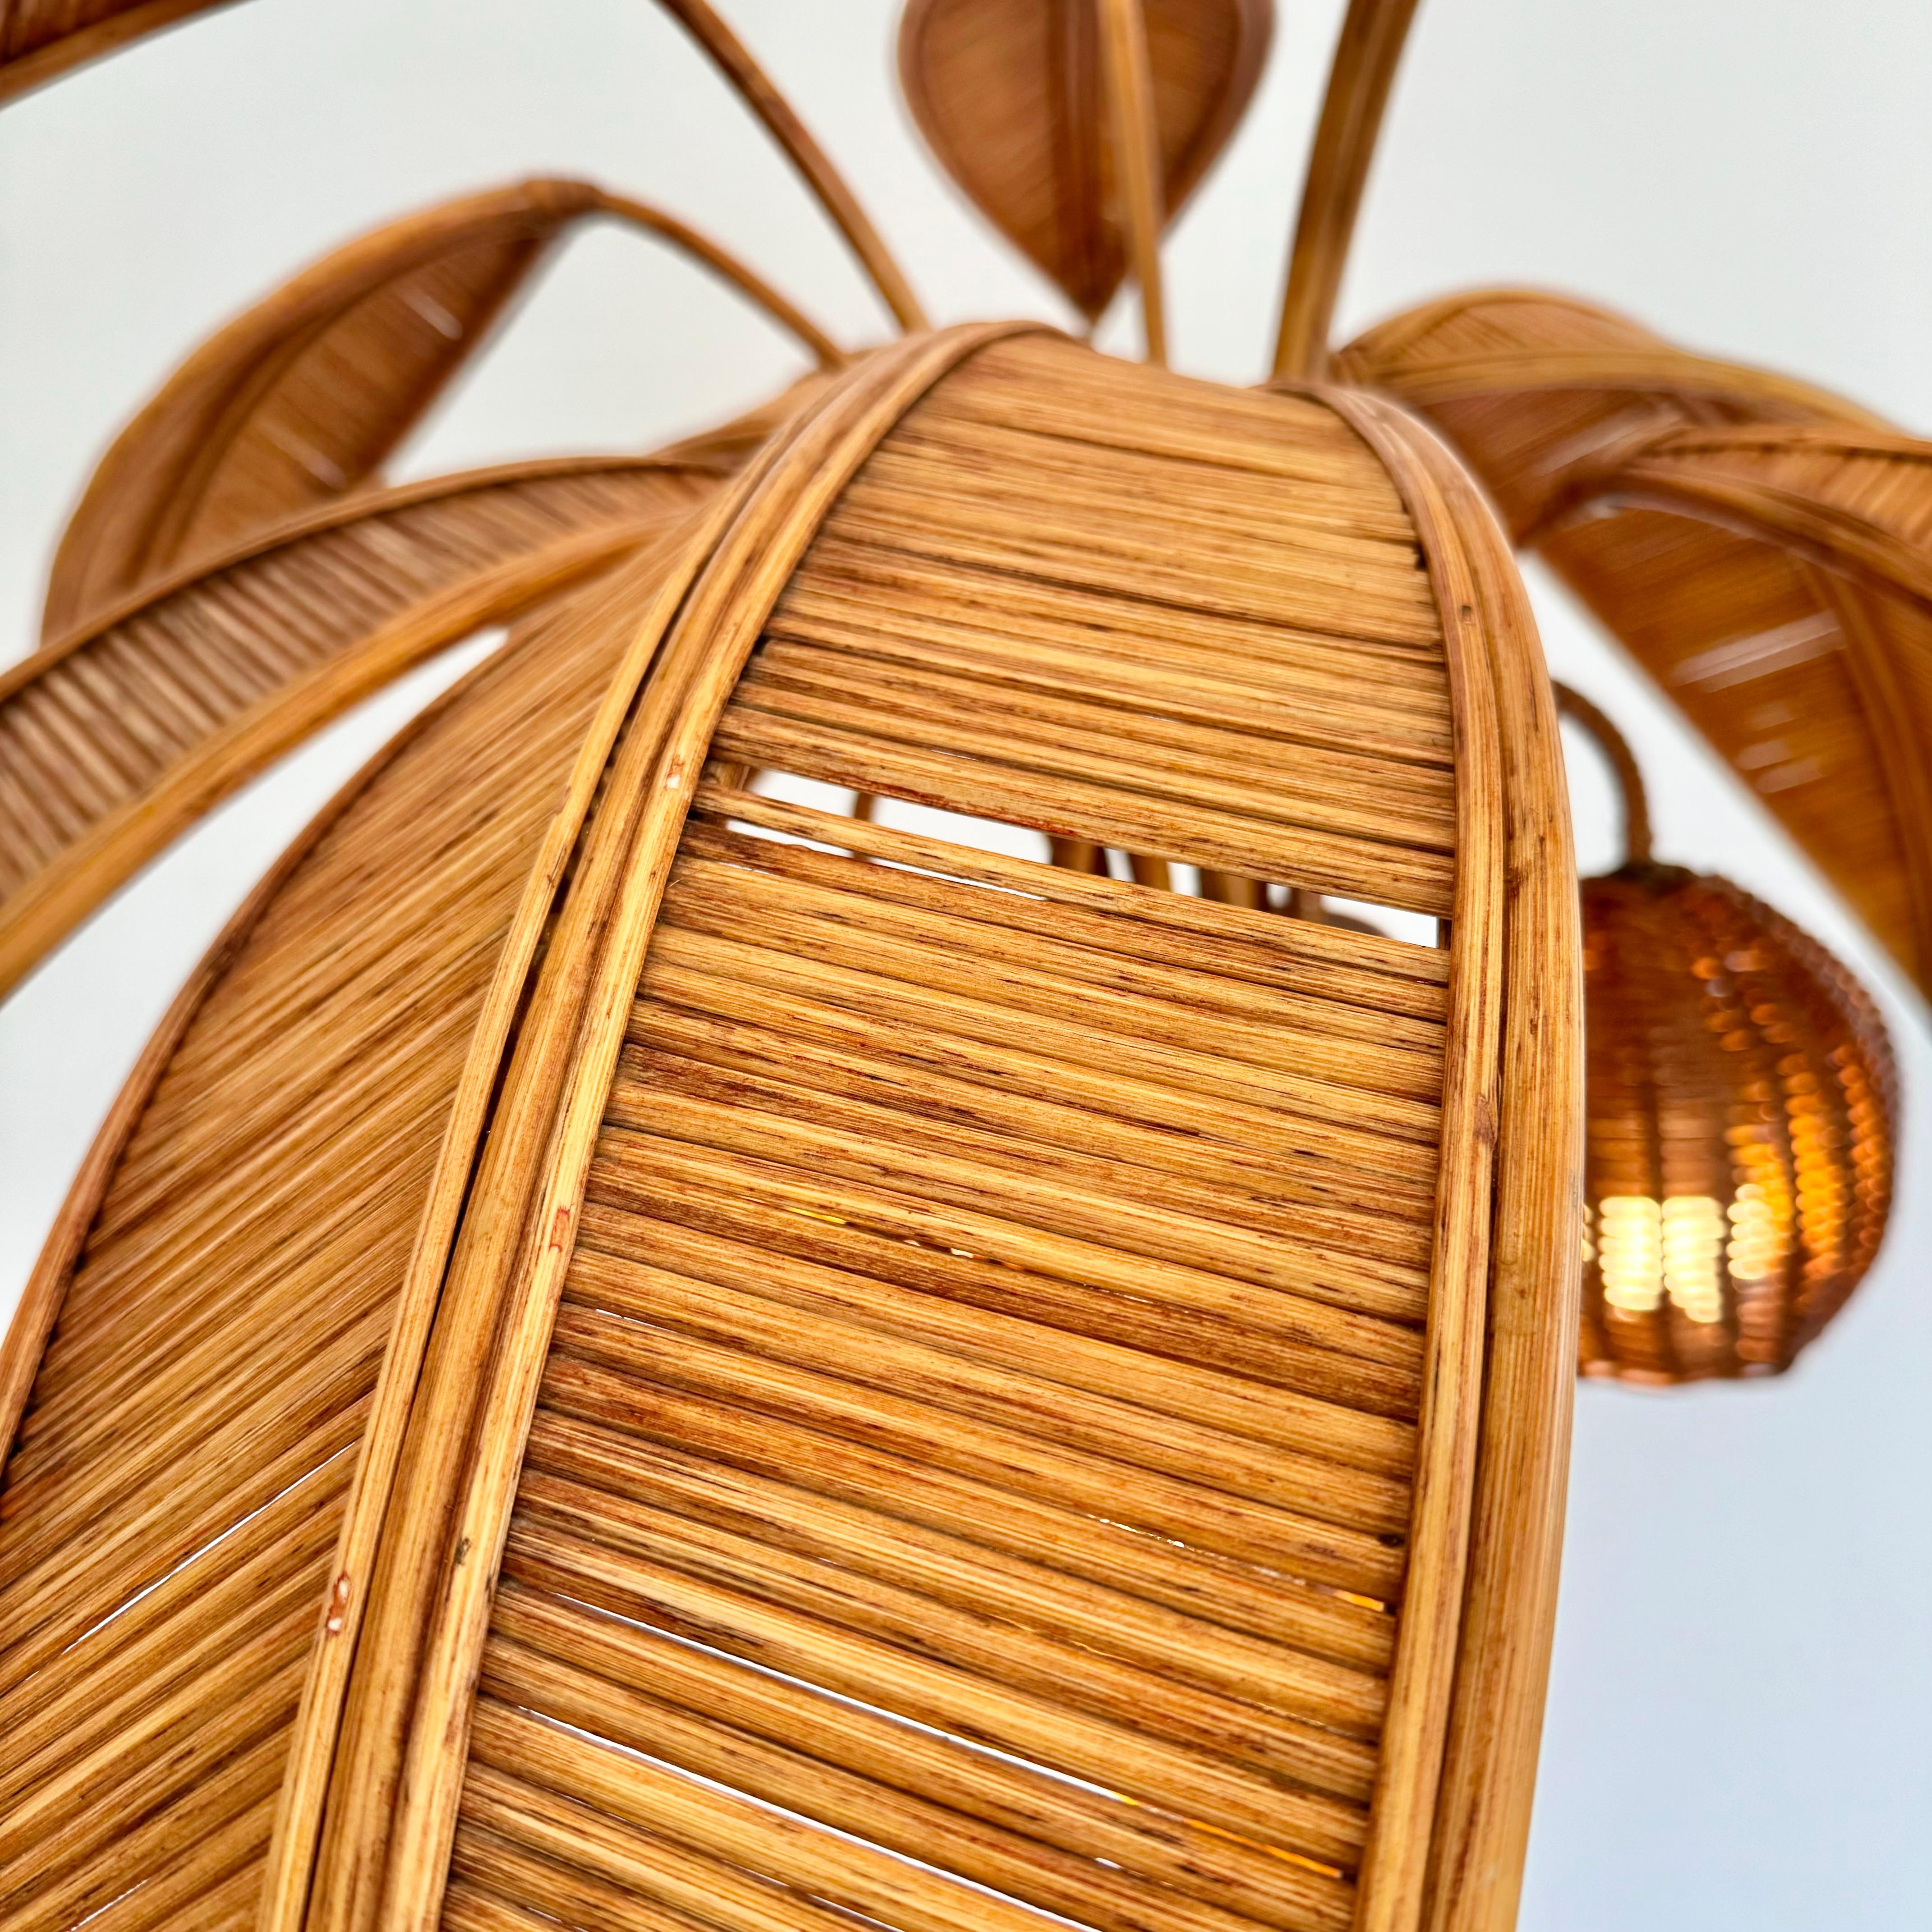 Rattan and Wicker Palm Tree Floor Lamp, 1970s United States For Sale 5